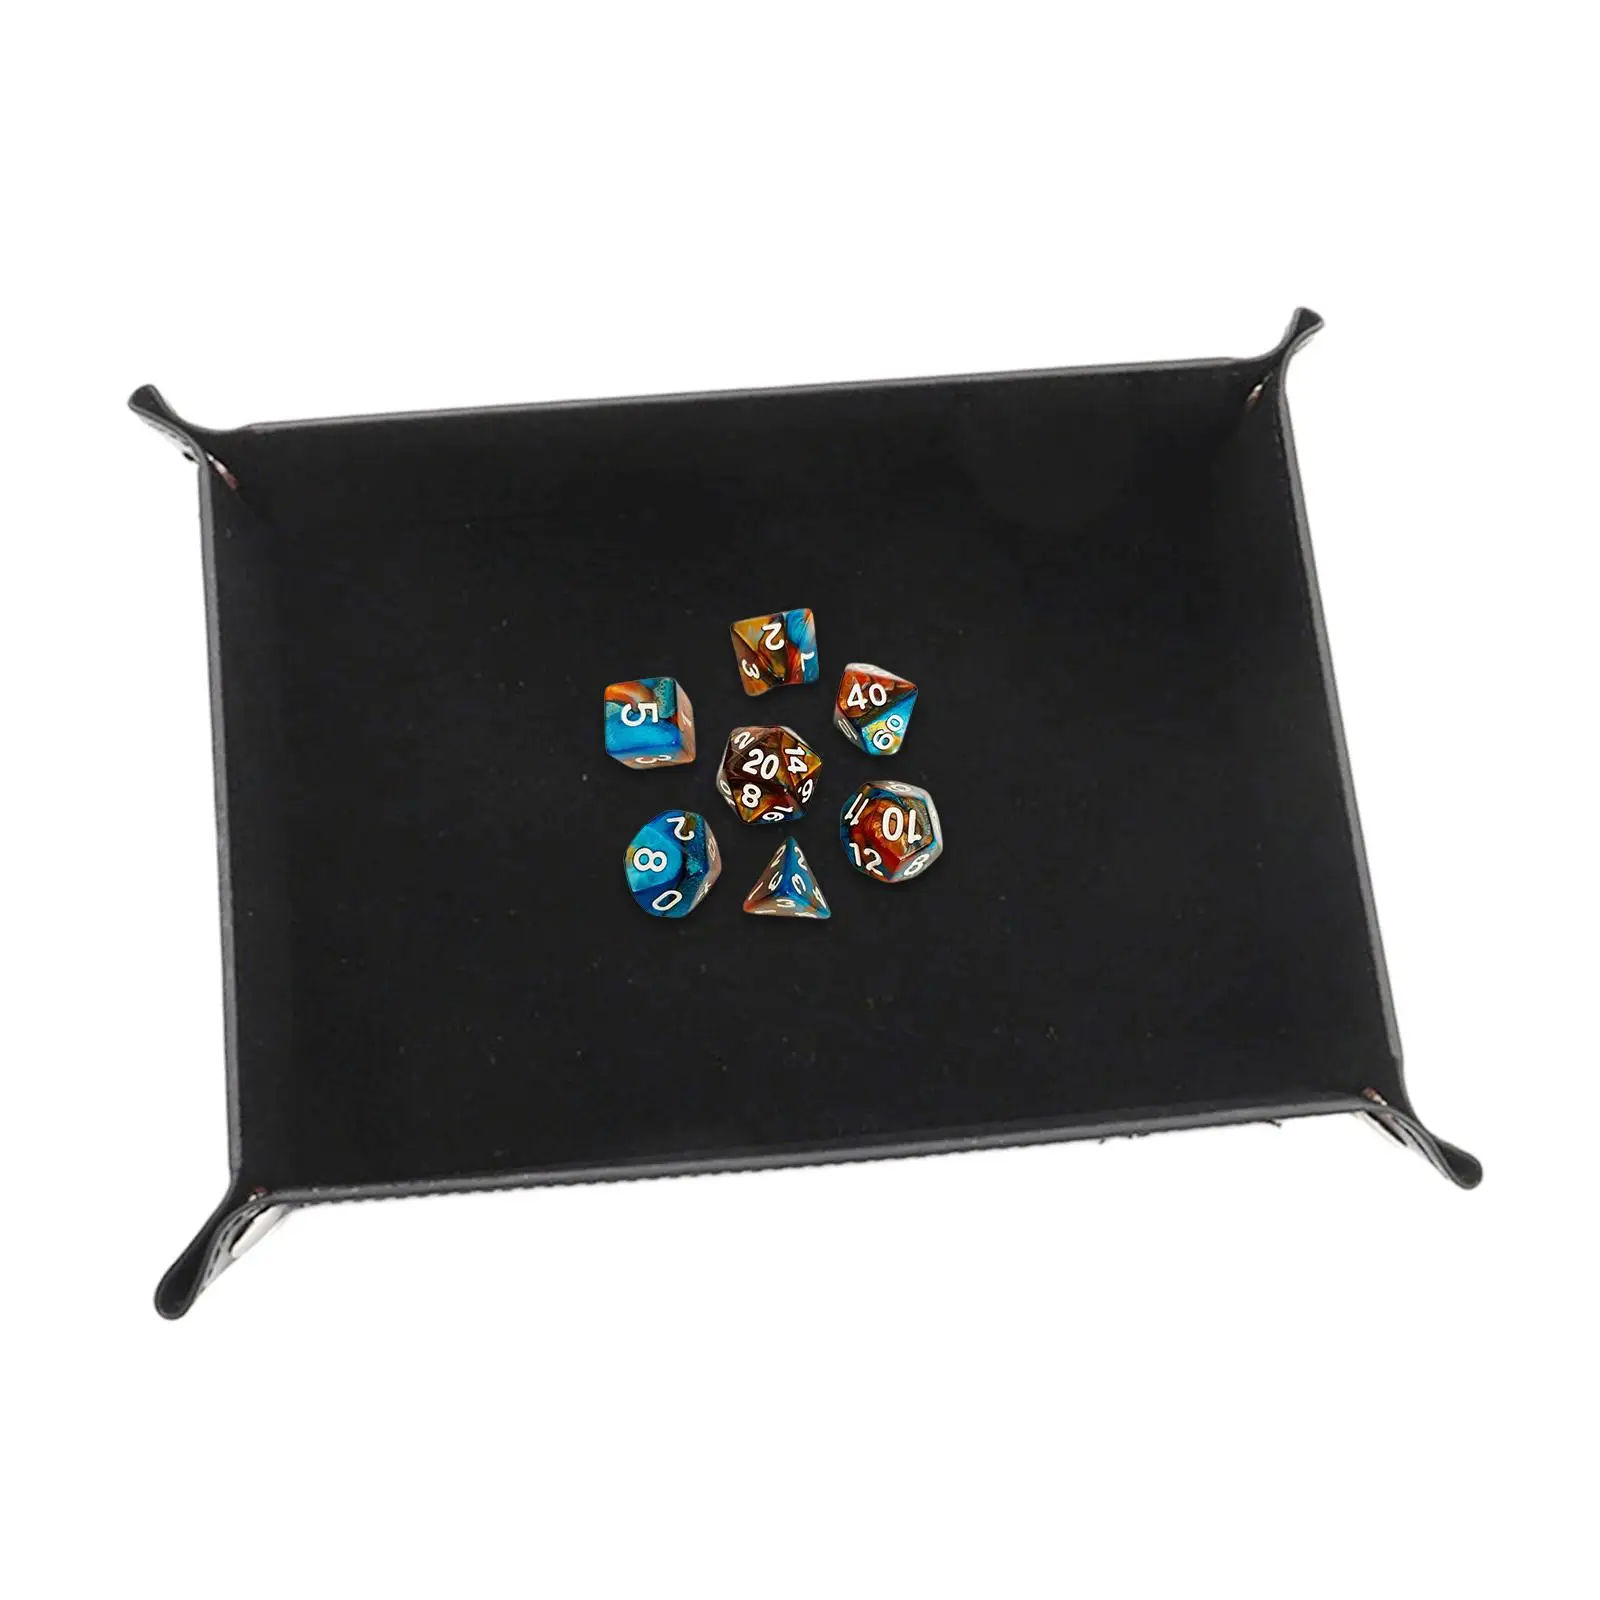 Folding Dice Tray Set Flannel Rectangle PU Leather Portable Reinforced Bottom Large for Board Games Office Desk